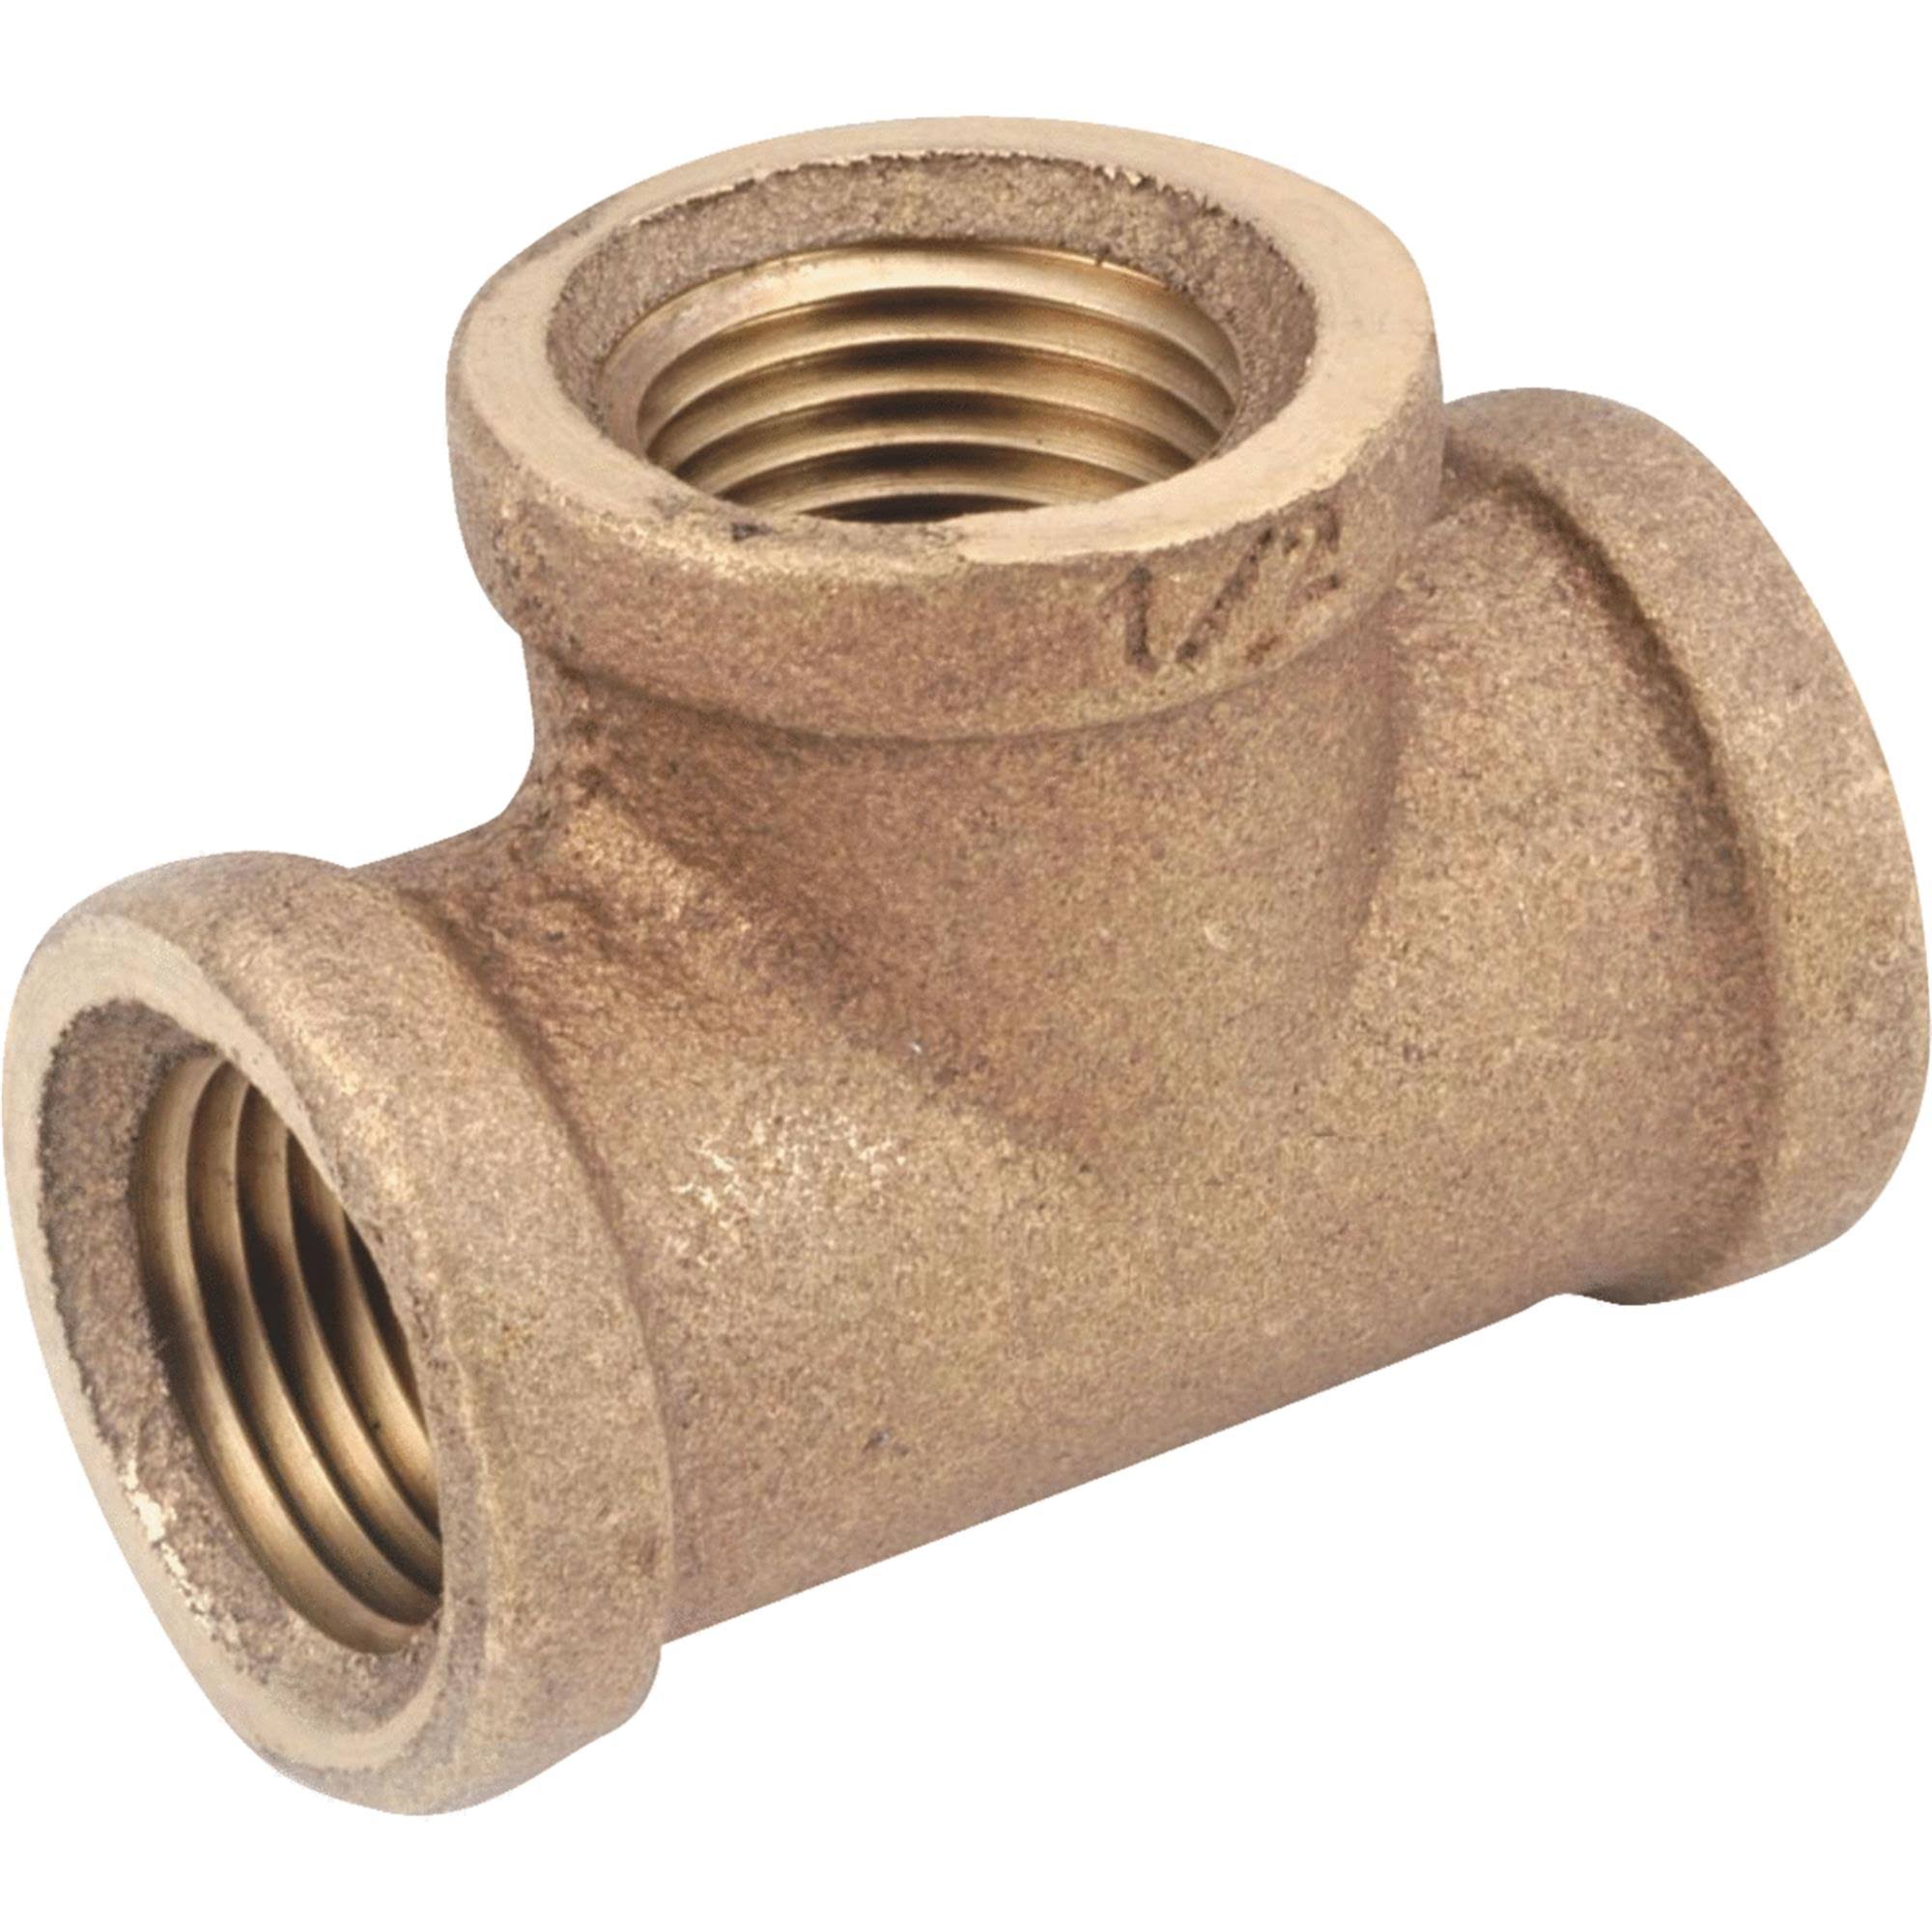 Anderson Metals Corp Red Brass Threaded Tee - 1/4"